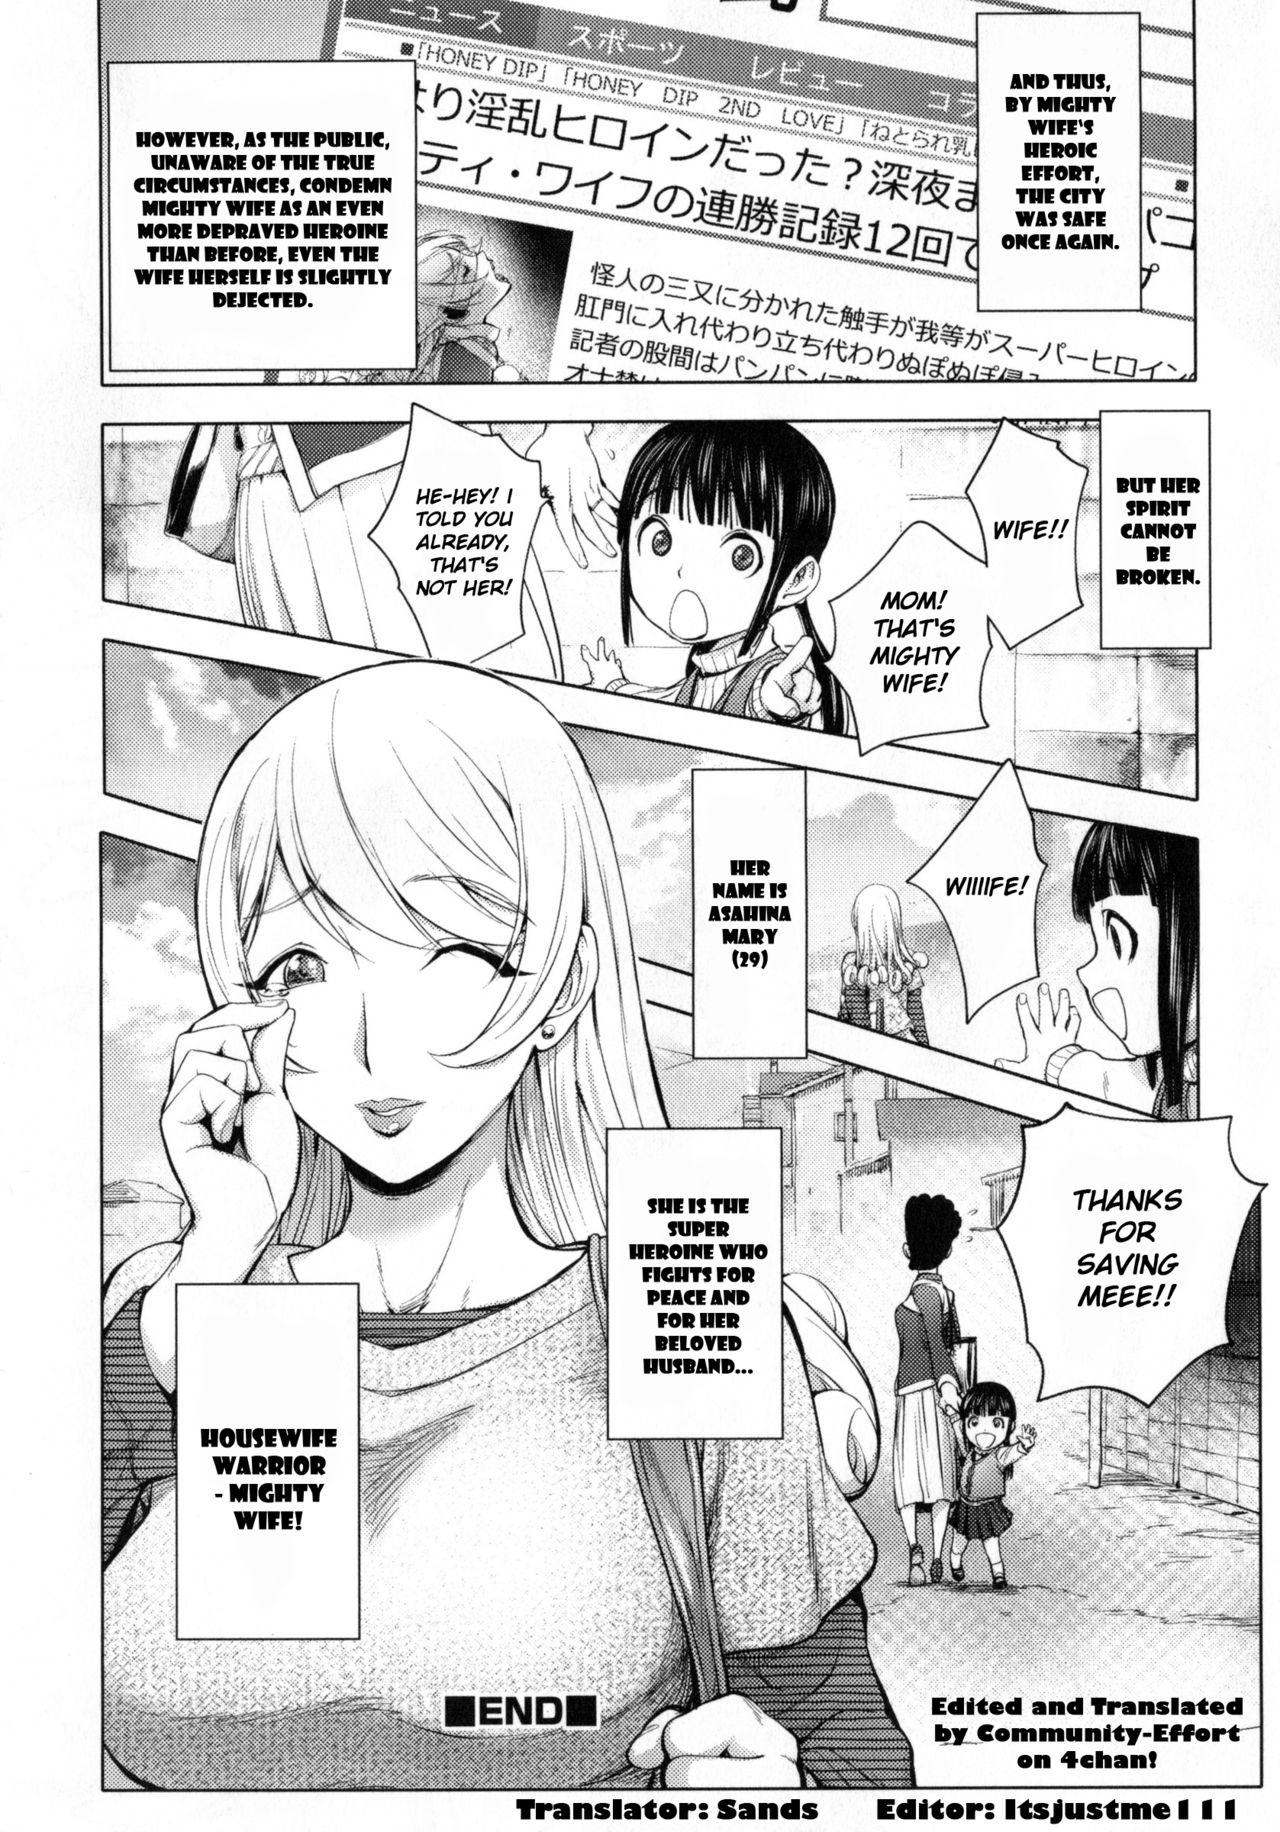 Tan Aisai Senshi Mighty Wife 8th | Beloved Housewife Warrior Mighty Wife 8th Hot Wife - Page 19